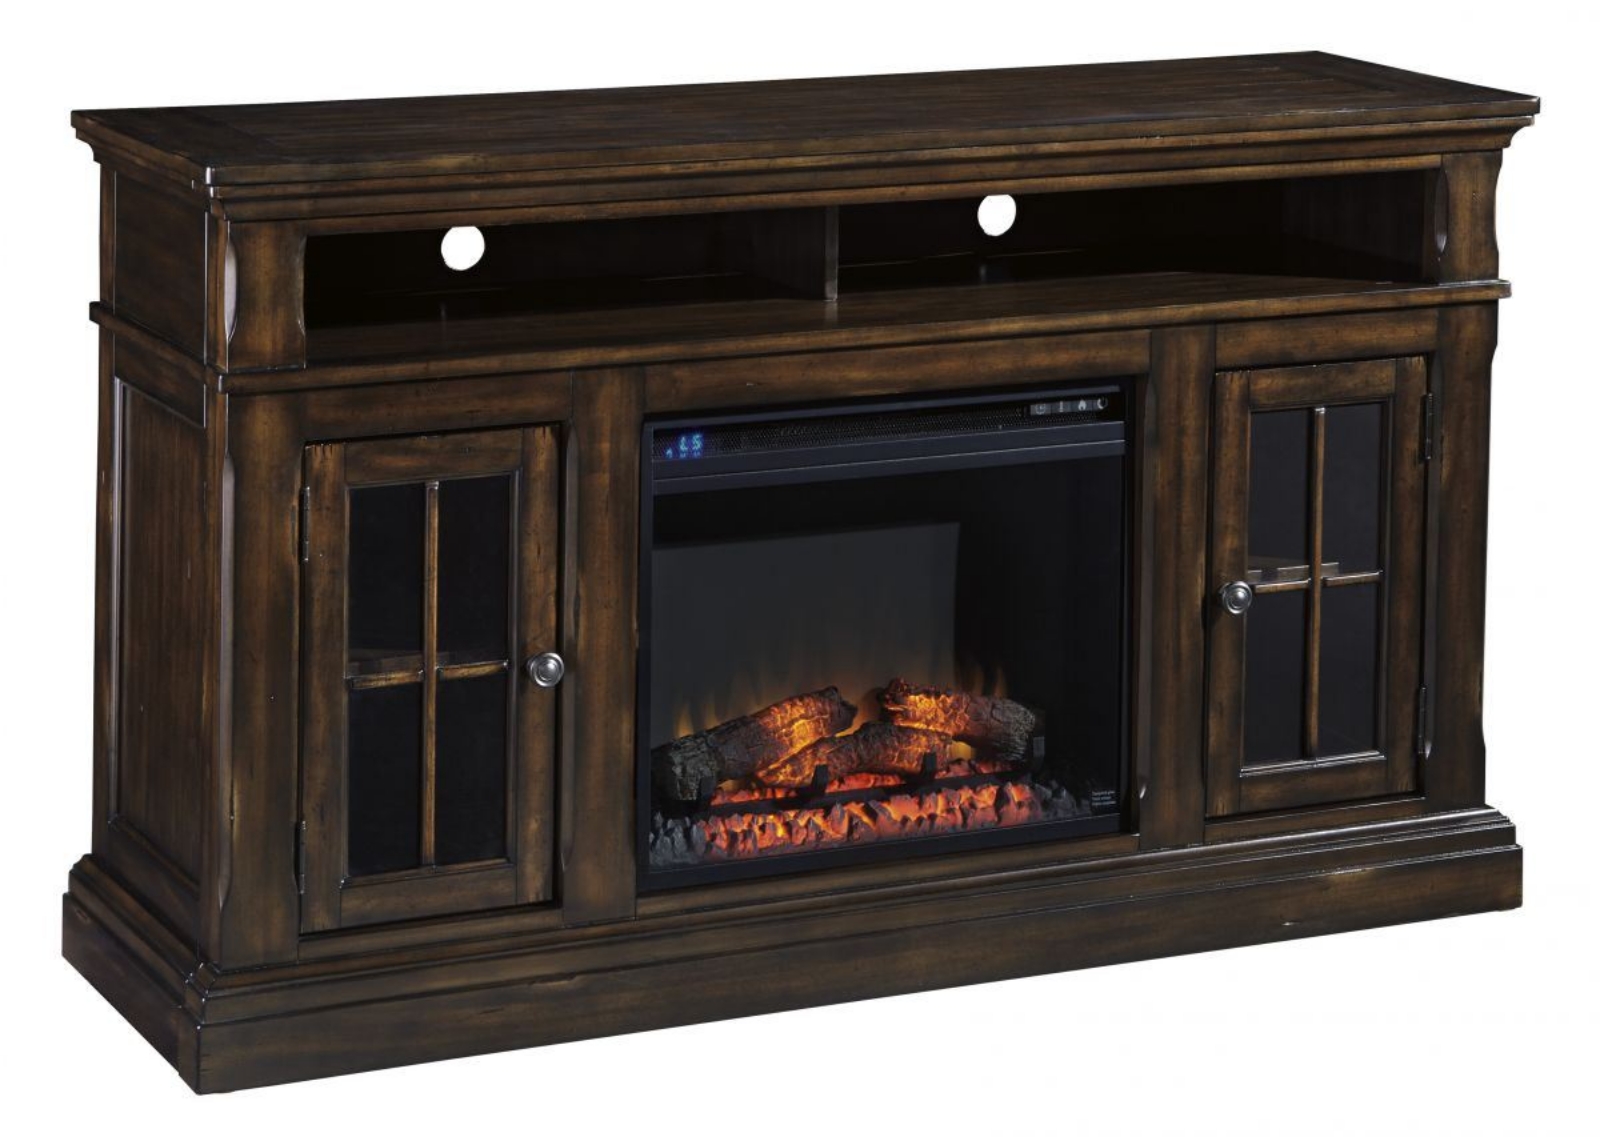 Picture of Roddinton TV Stand with Fireplace